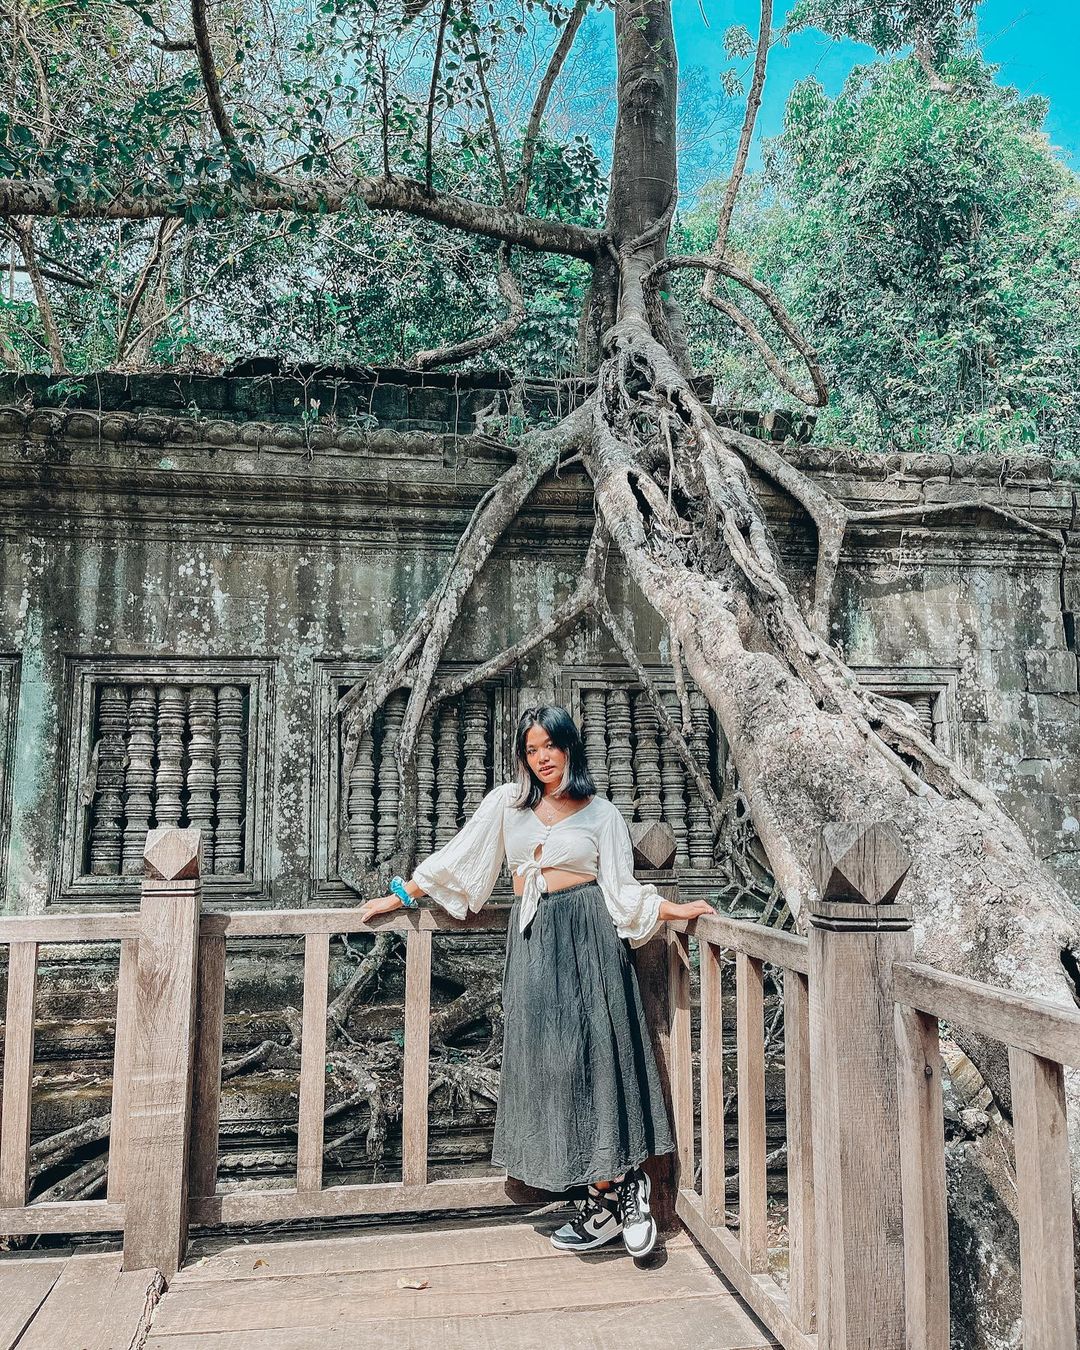 Prasat Beng Mealea - Can't-Miss Attractions in Cambodia